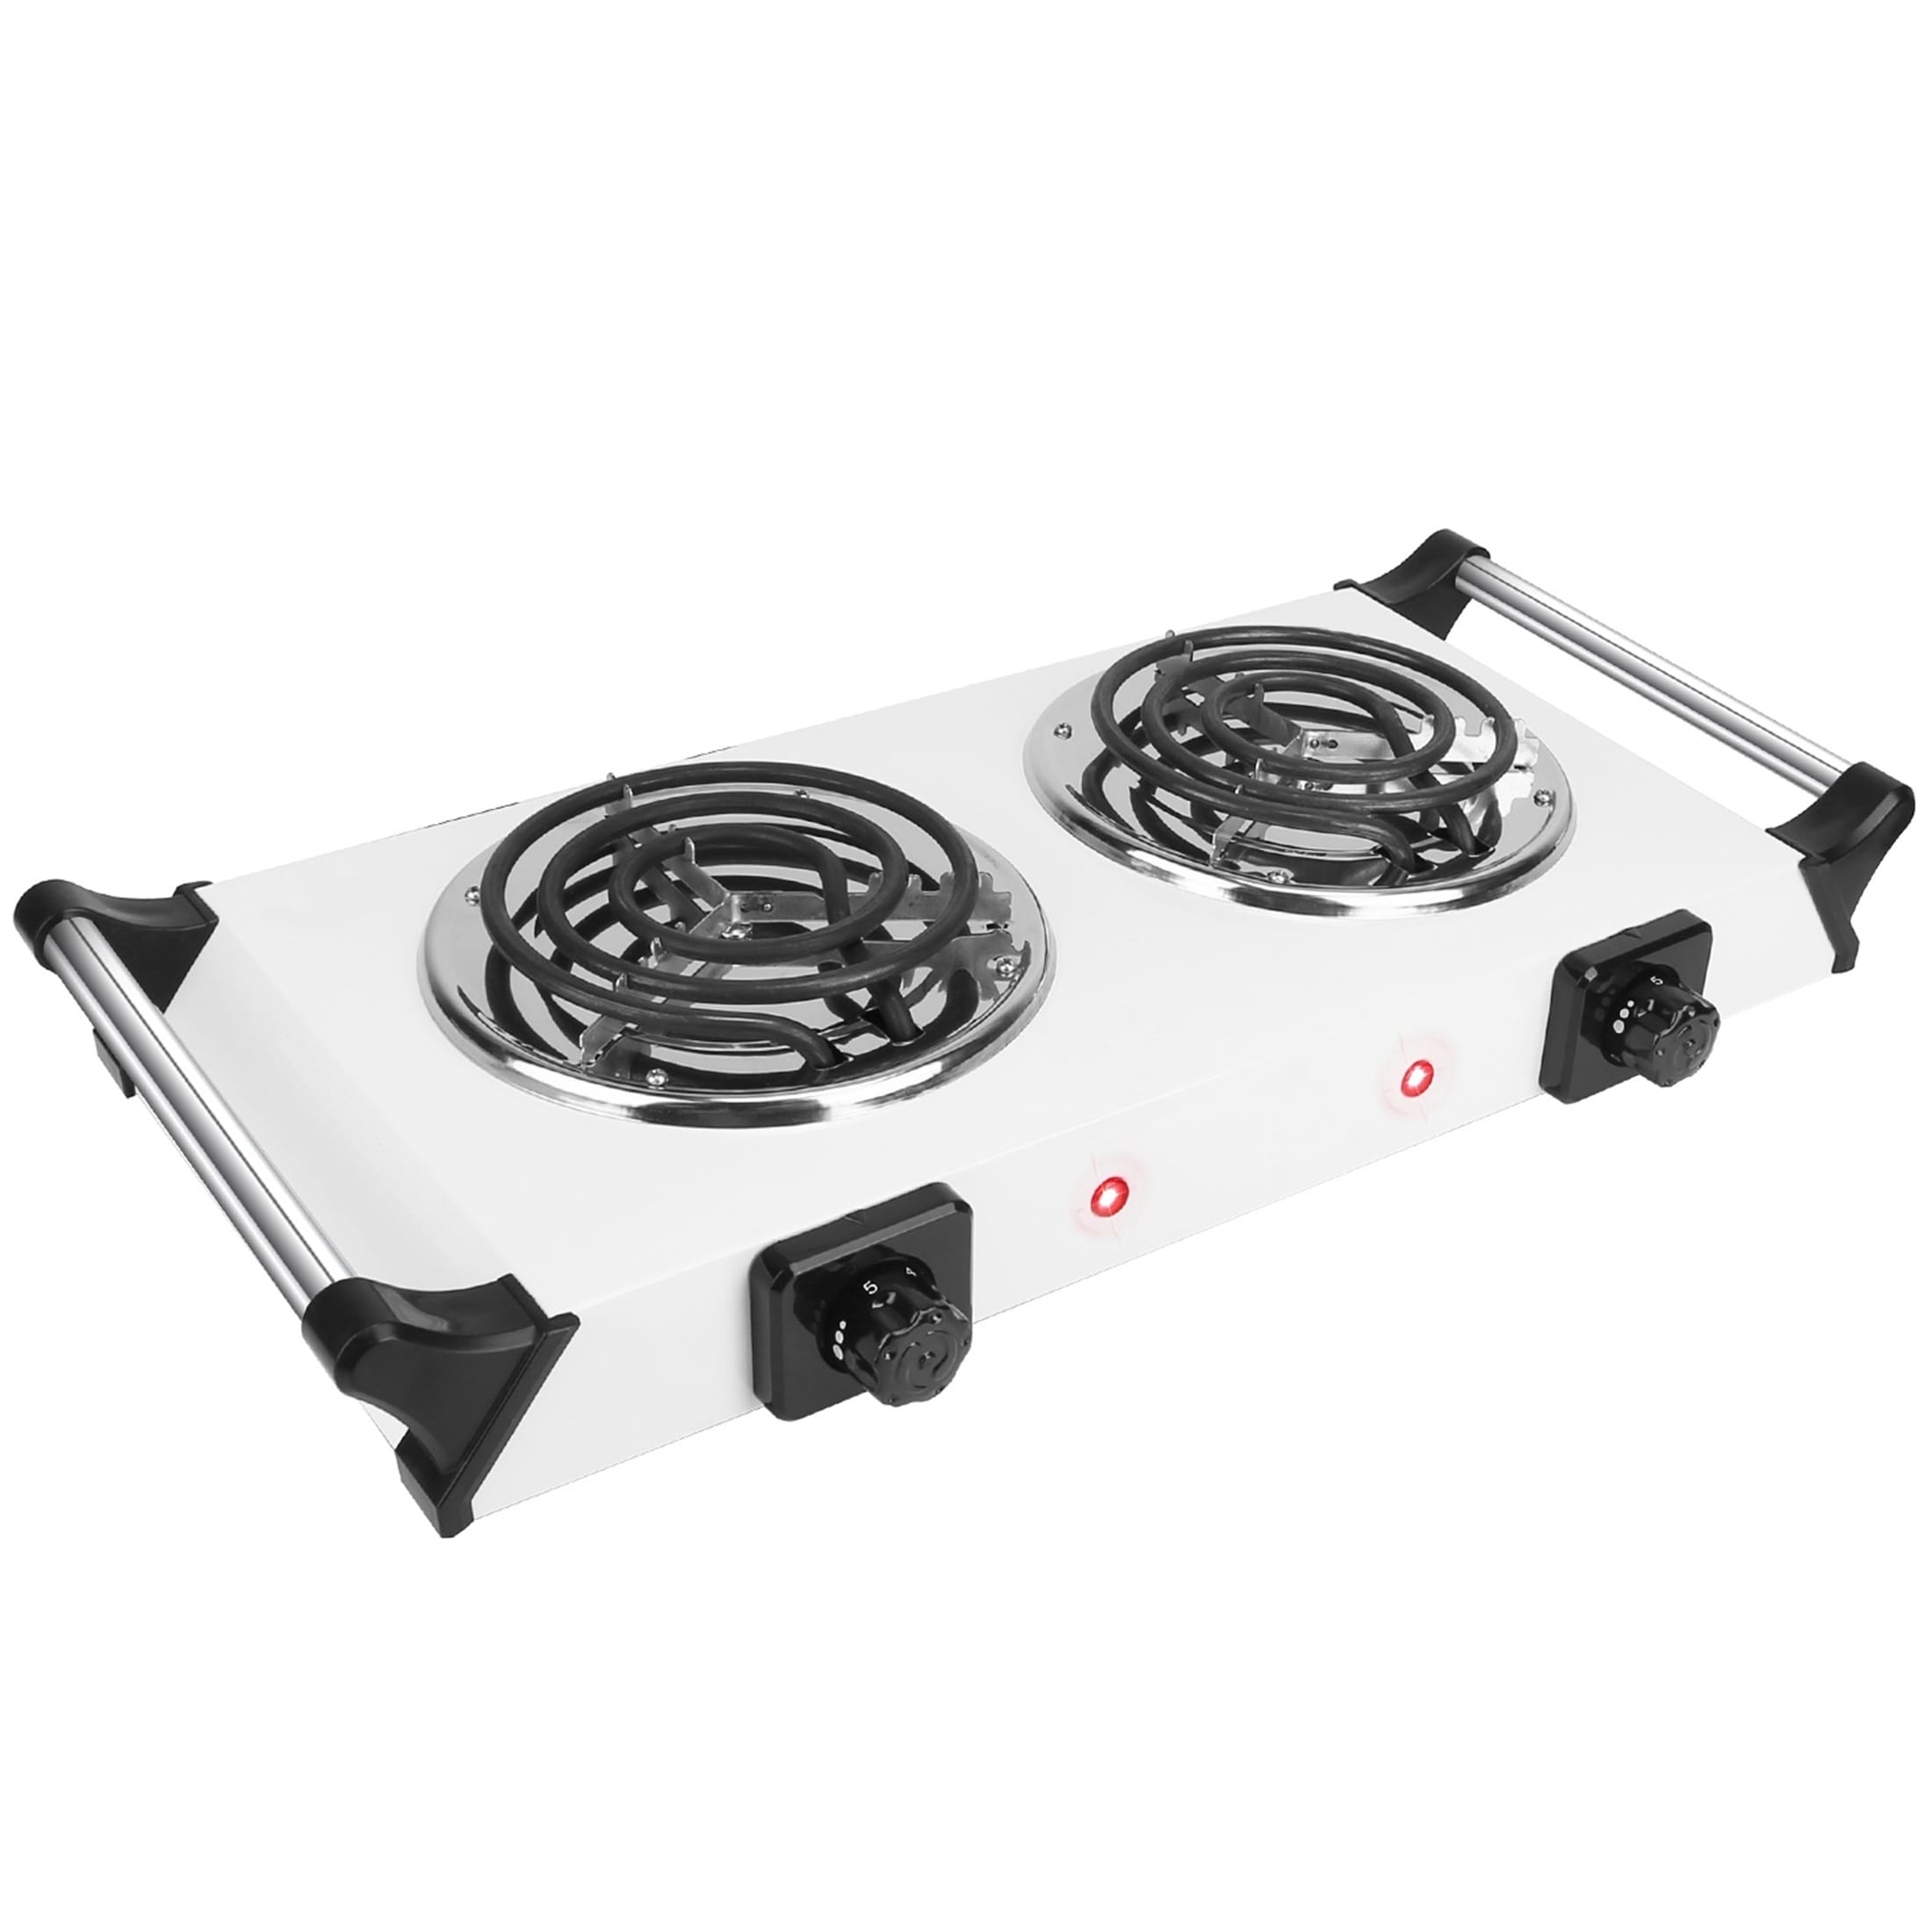 https://ak1.ostkcdn.com/images/products/is/images/direct/071e285d5e2c57a88bed1e6c427f6472f4326012/2000W-Electric-Dual-Burner.jpg